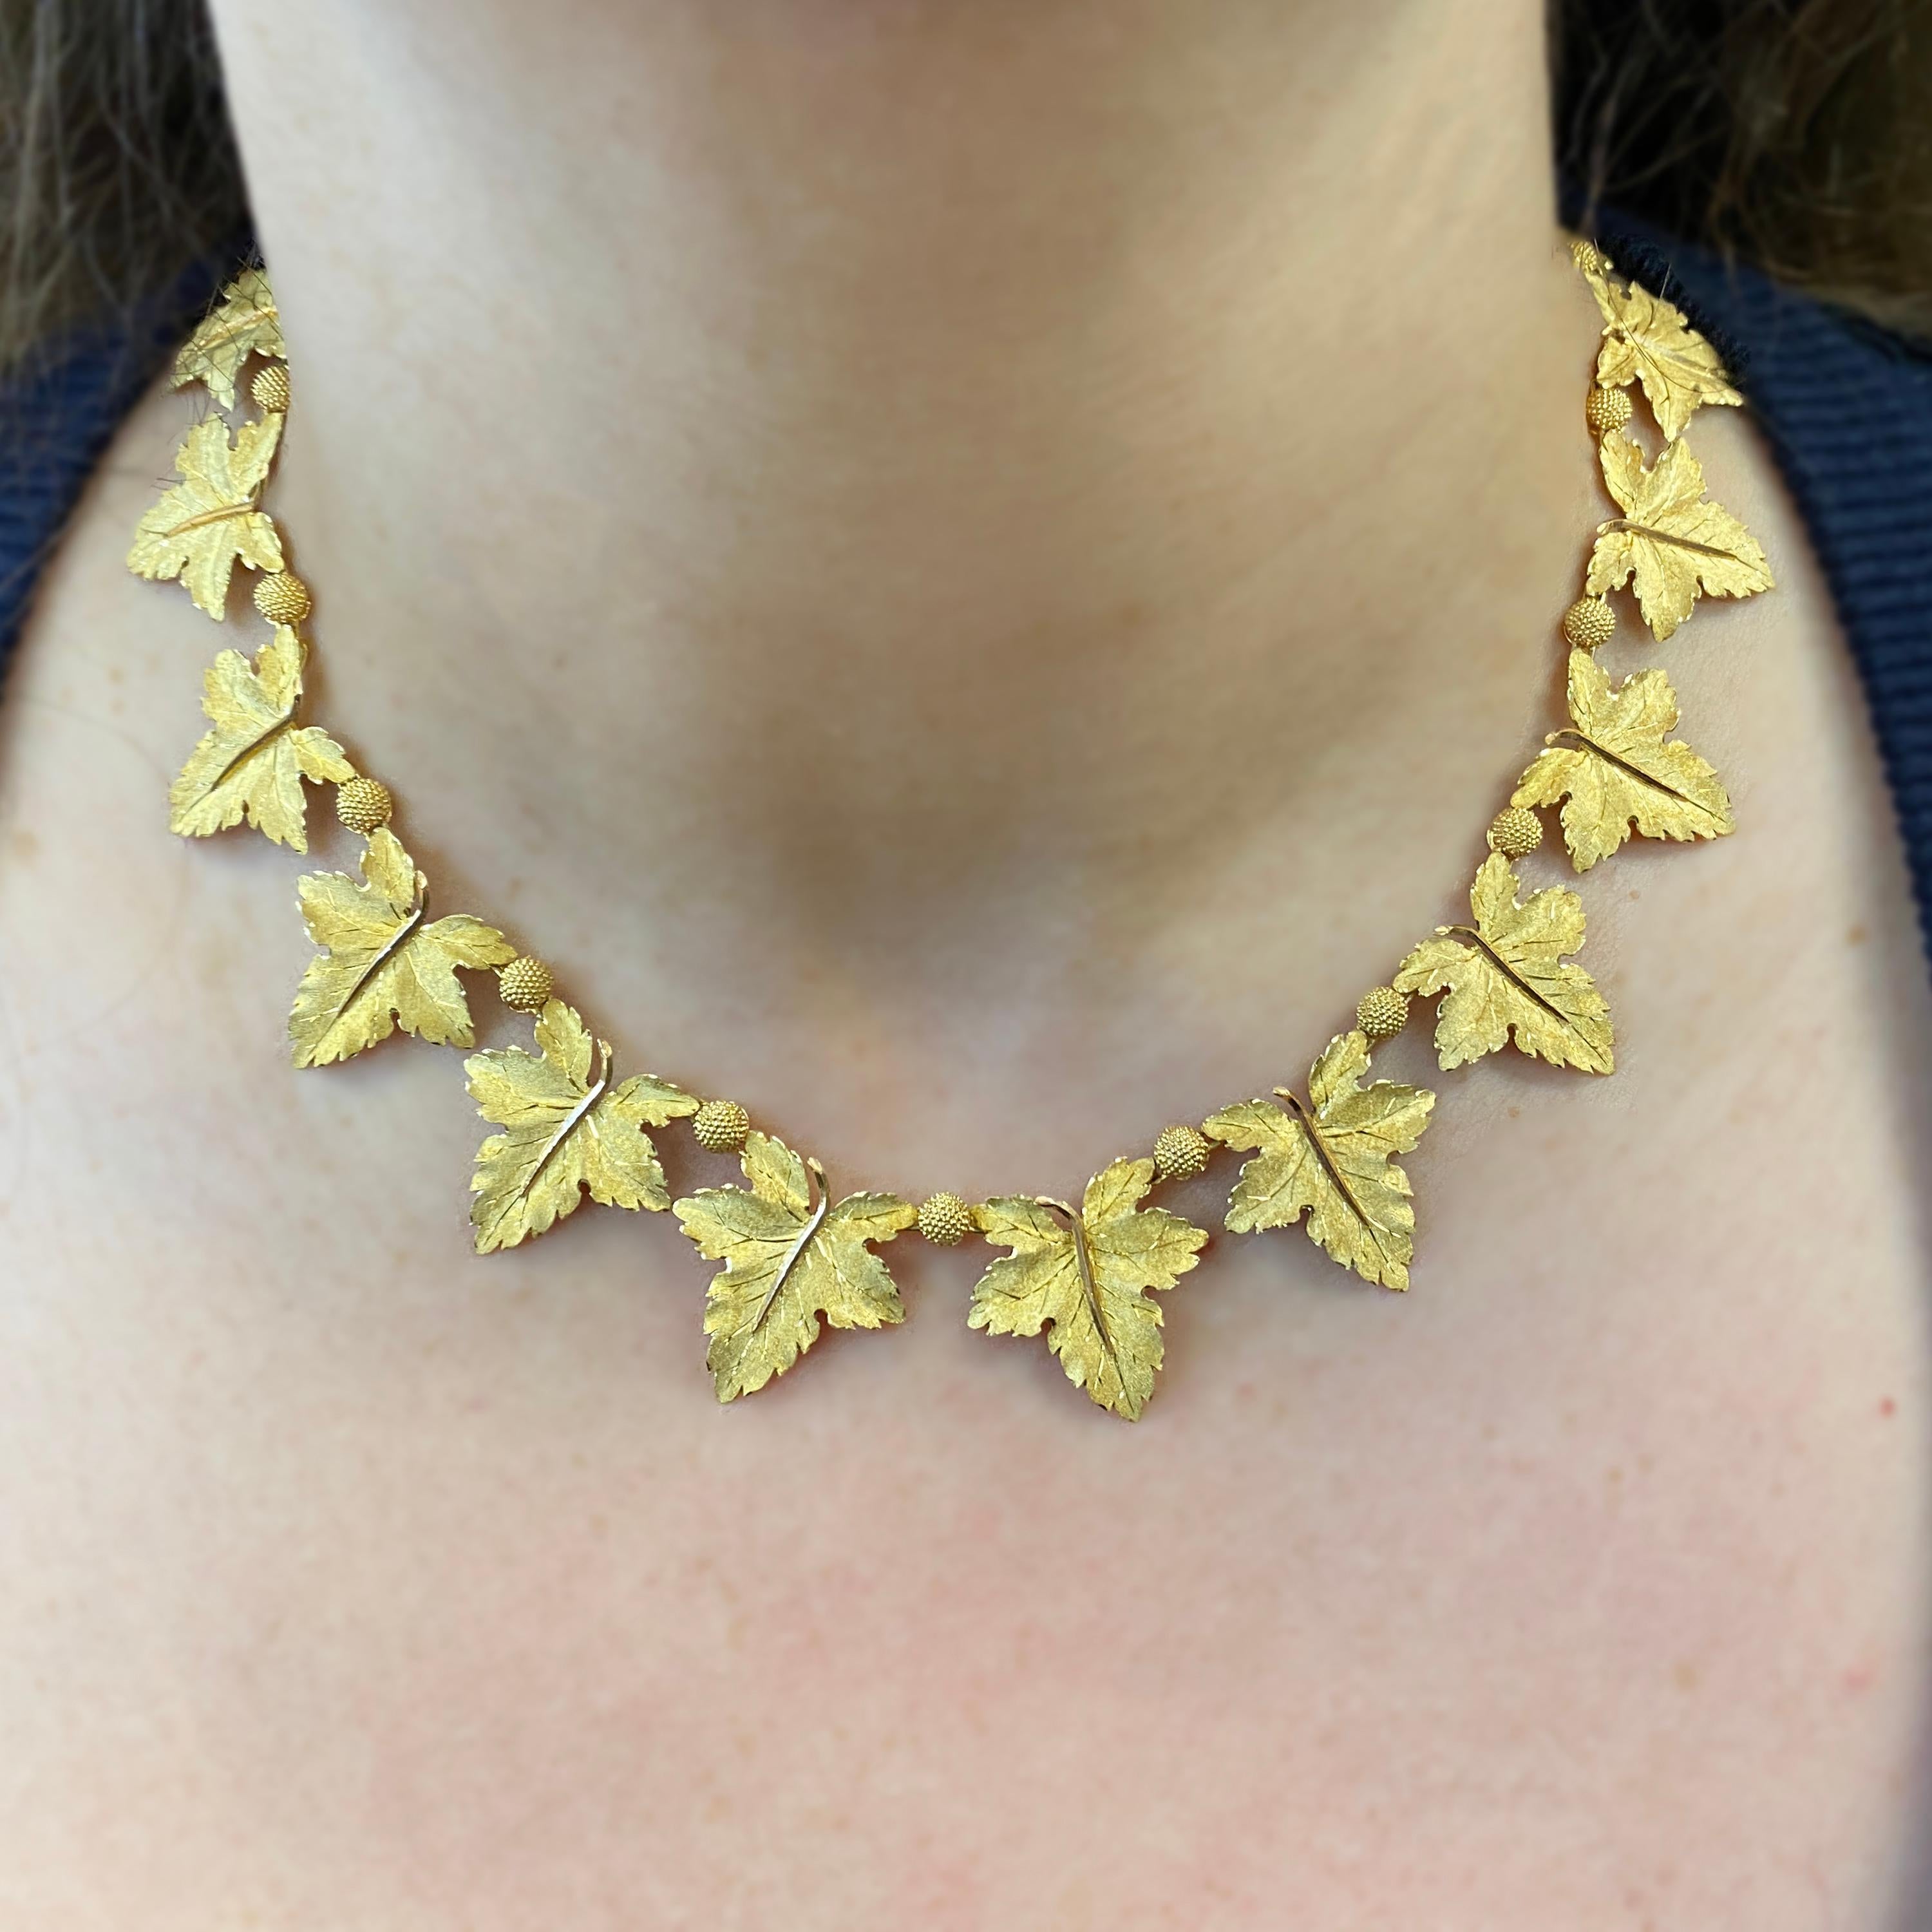 Buccellati 18K Yellow Gold Floral Flower Leaf Motif Necklace

This statement necklace by Buccellati brings to life the engraving techniques and motifs inspired by nature that convey the appearance of satin.

Necklace is 17 inches in length and 0.80